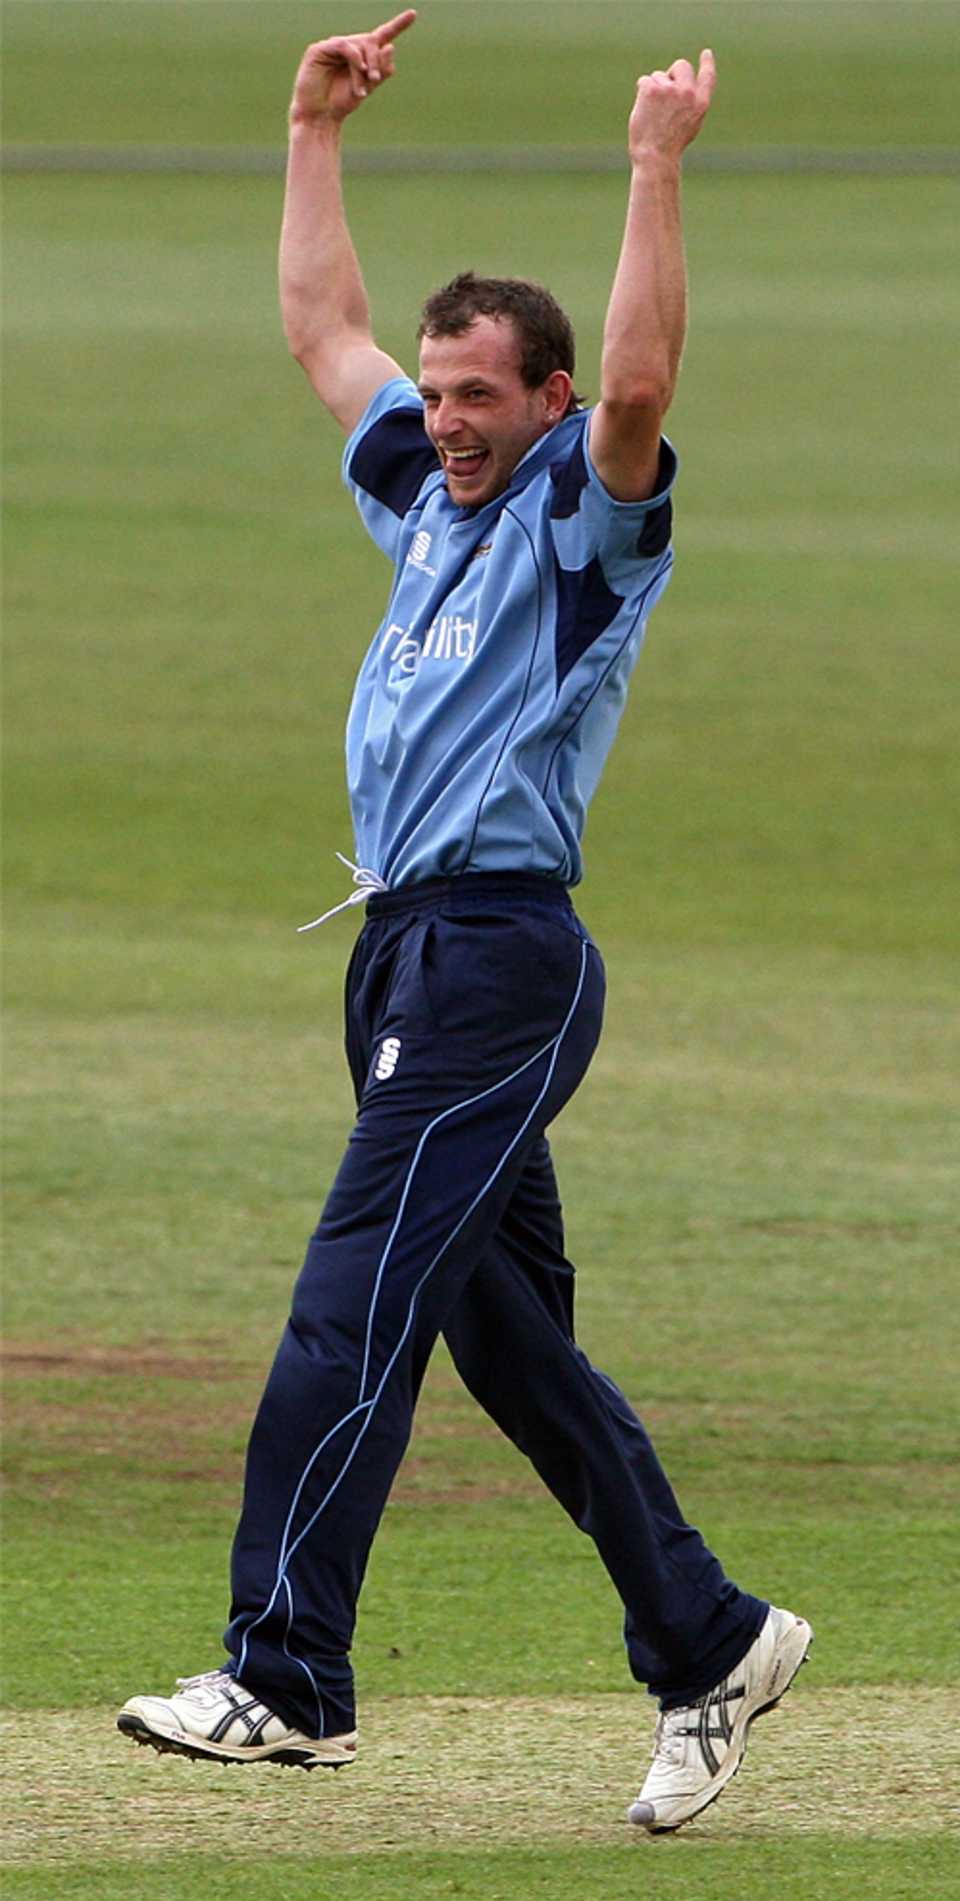 Graham Wagg celebrates, as did the rest of his team on beating Lancashire, Derbyshire v Lancashire, Friends Provident Trophy, Derby, May 22, 2008